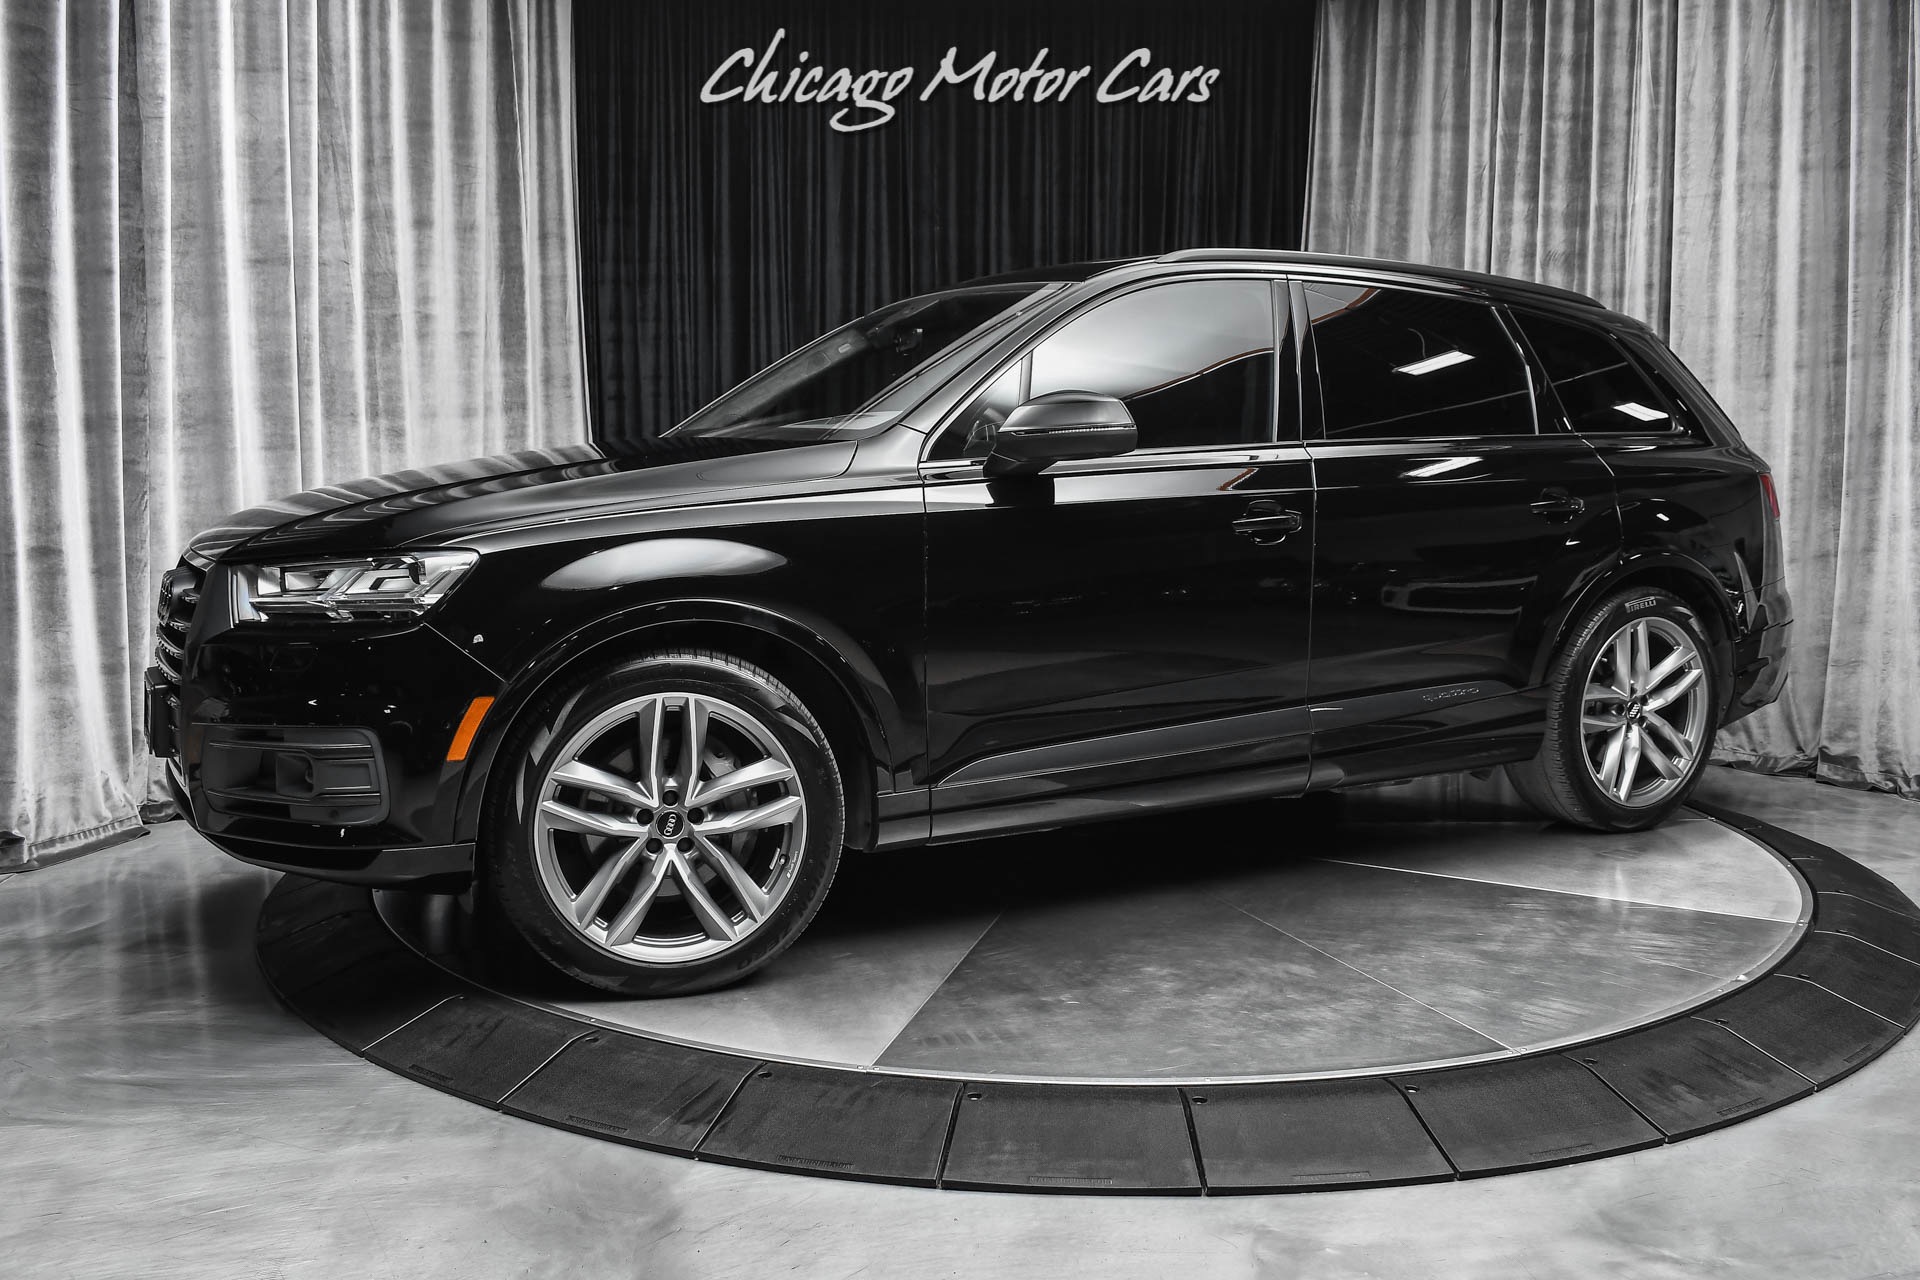 Used-2018-Audi-Q7-30T-Quattro-Prestige-81kMSRP-Luxury-Package-Driver-Assistance-Pack